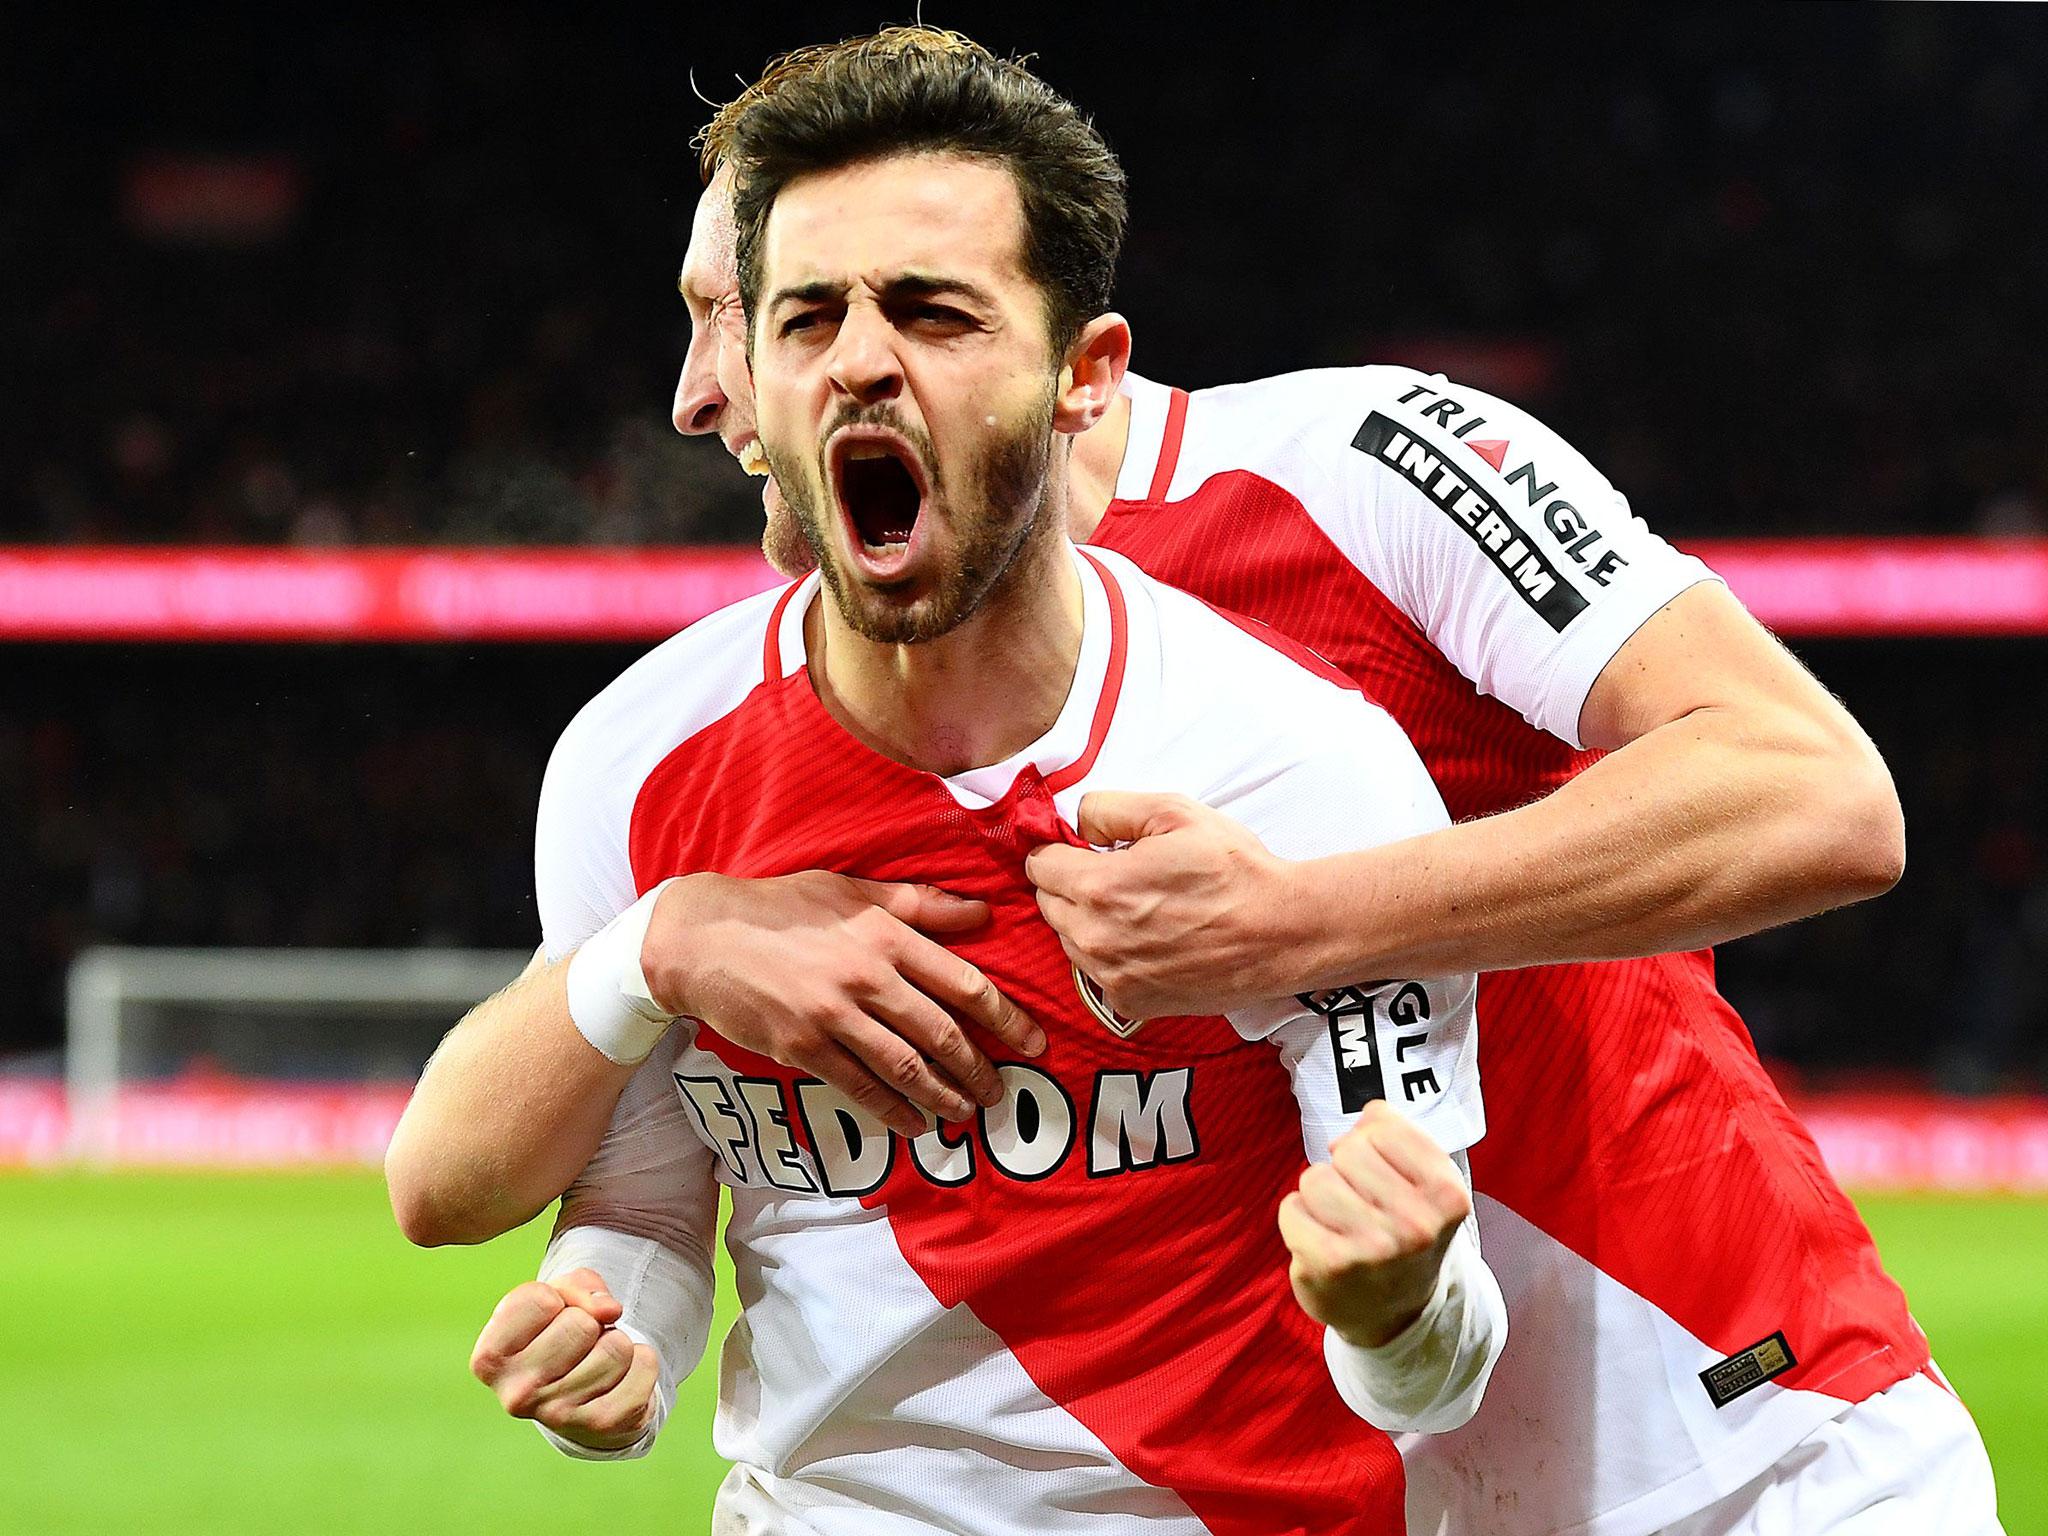 Bernardo Silva is attracting interest from Chelsea along with other leading clubs across Europe